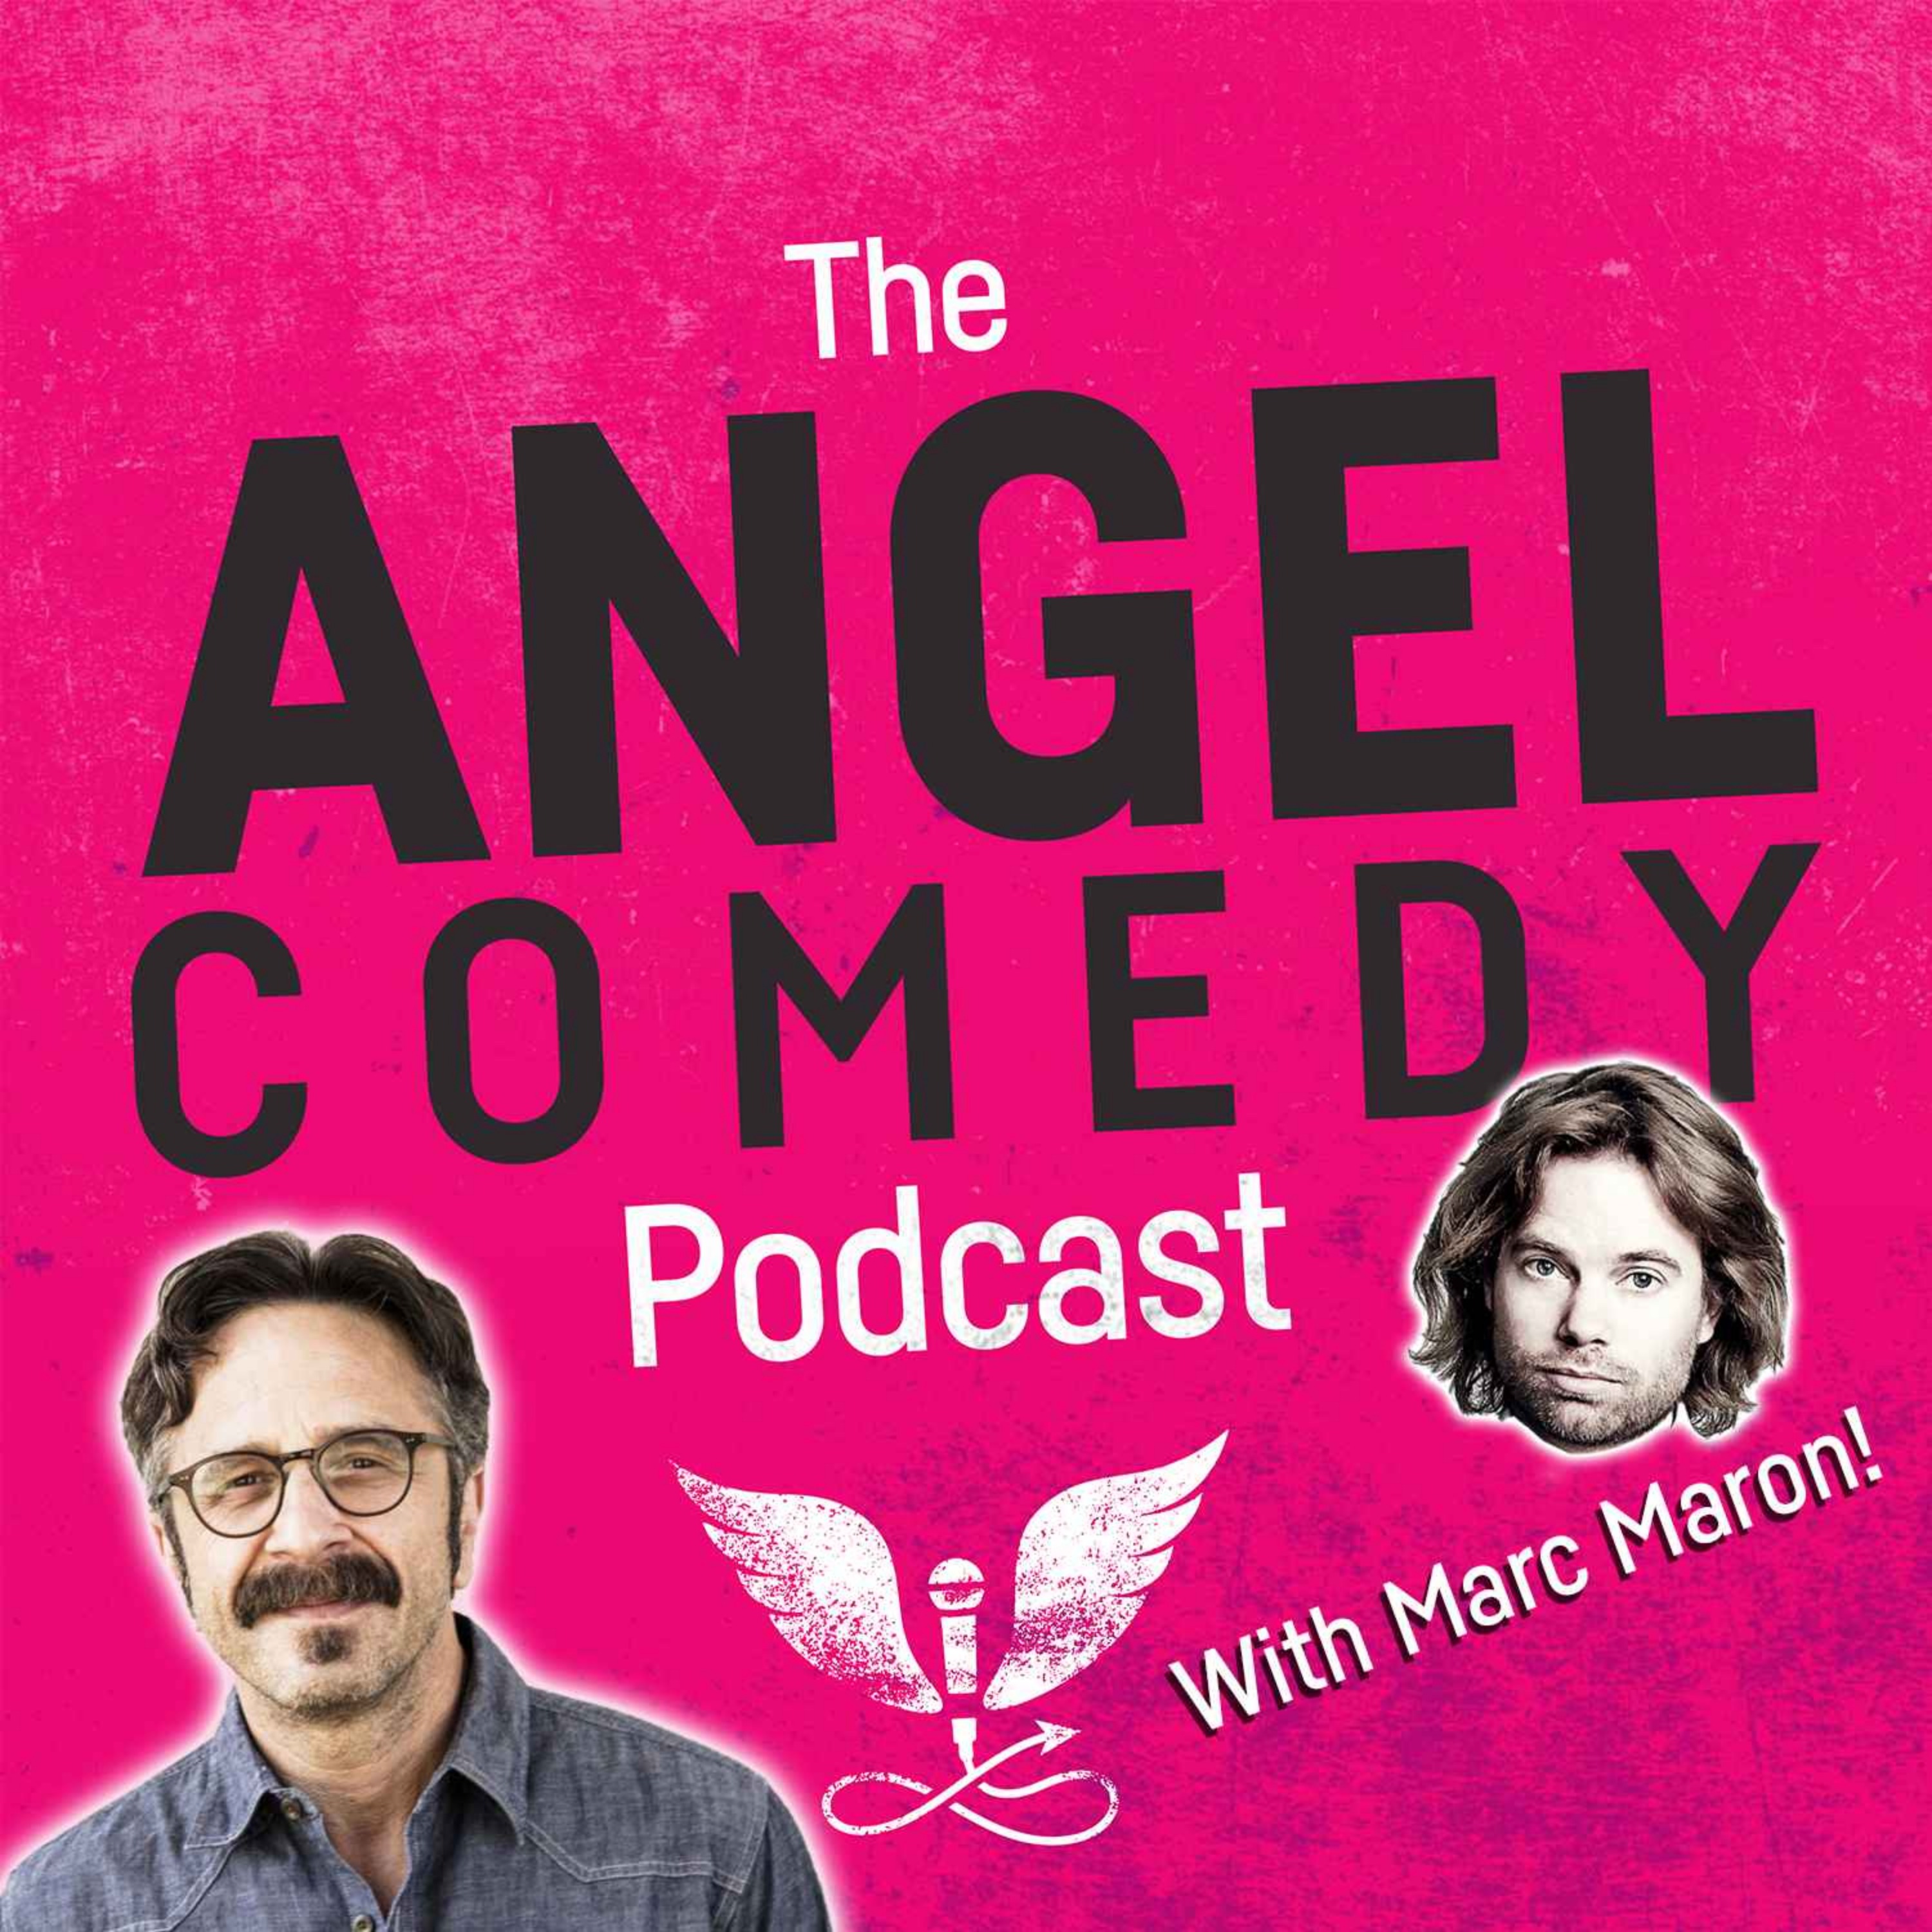 The Angel Comedy Podcast with Marc Maron!